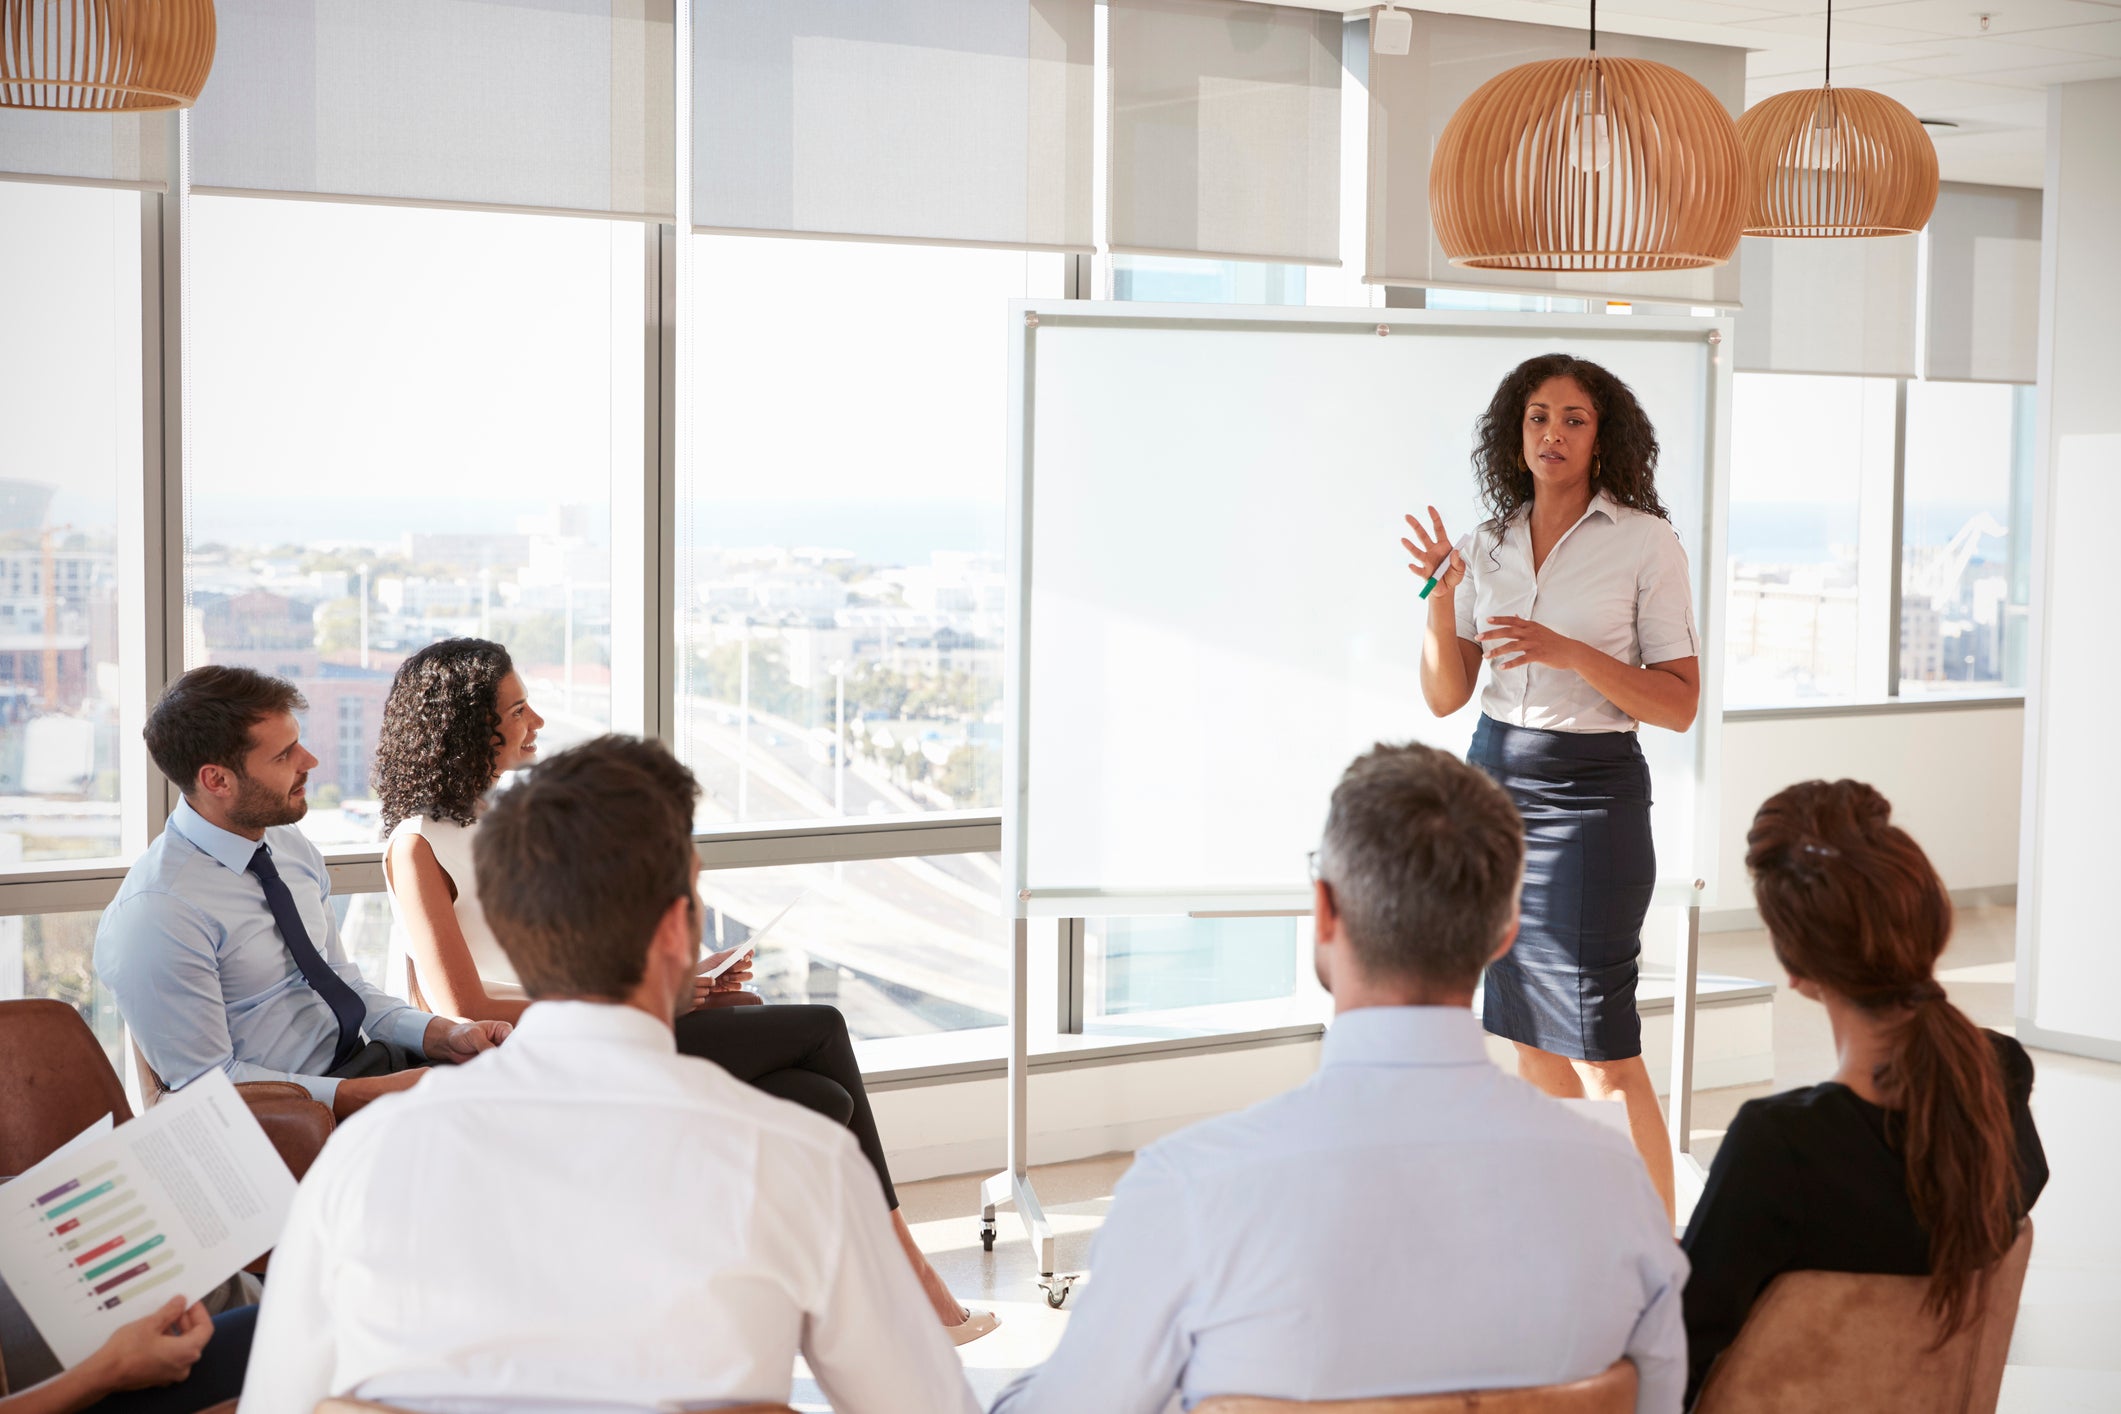 A businesswoman presents to a room of colleagues.